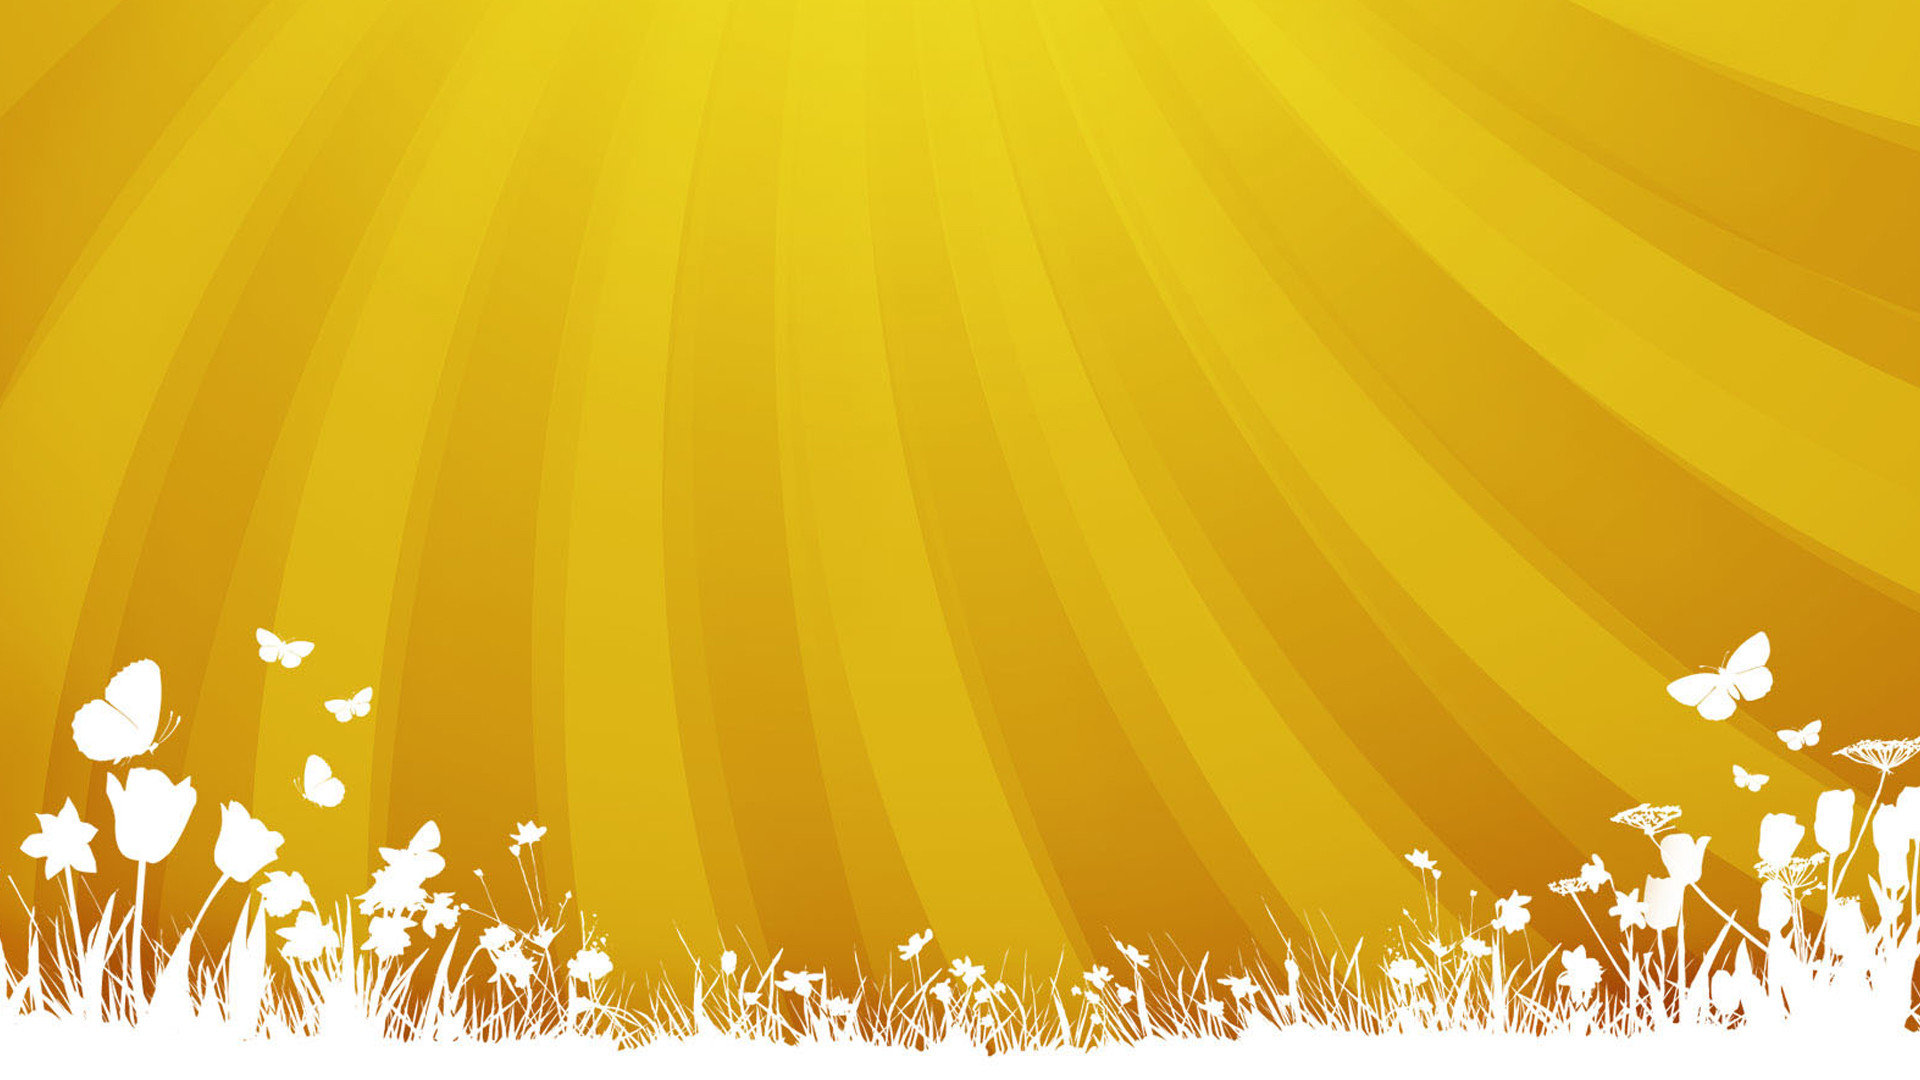 1920x1080 Abstract Artwork Floral Texture Graphics Illustrations Vector Art White  Yellow ...